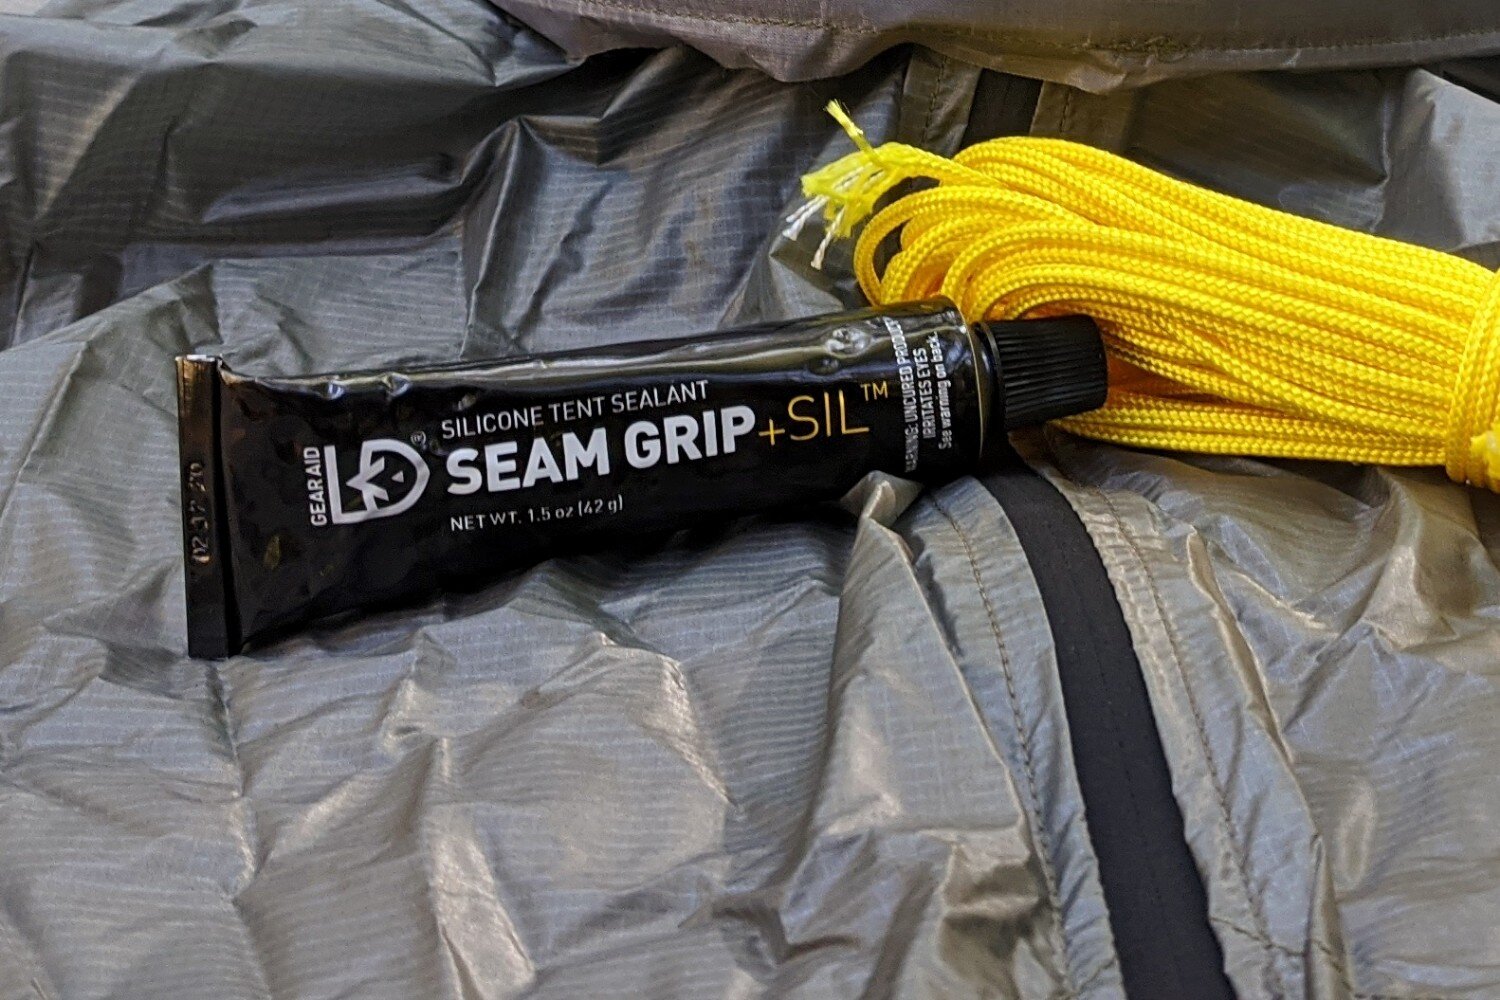 You can seal the seams yourself with Seam Grip if you want to save some money.